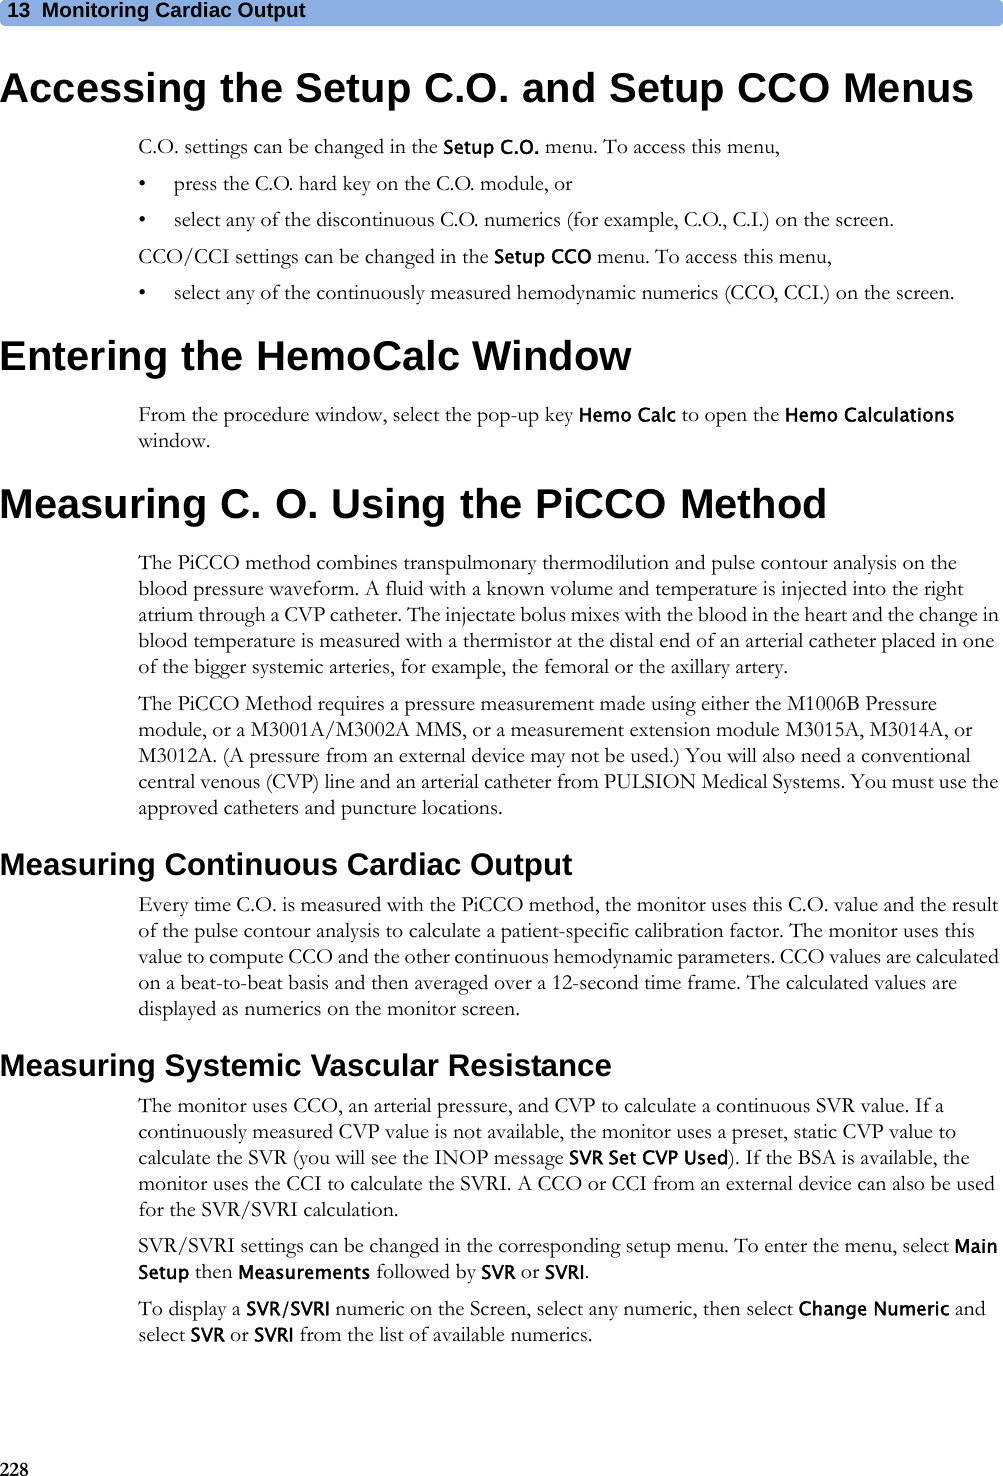 13 Monitoring Cardiac Output228Accessing the Setup C.O. and Setup CCO MenusC.O. settings can be changed in the Setup C.O. menu. To access this menu,• press the C.O. hard key on the C.O. module, or• select any of the discontinuous C.O. numerics (for example, C.O., C.I.) on the screen.CCO/CCI settings can be changed in the Setup CCO menu. To access this menu,• select any of the continuously measured hemodynamic numerics (CCO, CCI.) on the screen.Entering the HemoCalc WindowFrom the procedure window, select the pop-up key Hemo Calc to open the Hemo Calculations window.Measuring C. O. Using the PiCCO MethodThe PiCCO method combines transpulmonary thermodilution and pulse contour analysis on the blood pressure waveform. A fluid with a known volume and temperature is injected into the right atrium through a CVP catheter. The injectate bolus mixes with the blood in the heart and the change in blood temperature is measured with a thermistor at the distal end of an arterial catheter placed in one of the bigger systemic arteries, for example, the femoral or the axillary artery.The PiCCO Method requires a pressure measurement made using either the M1006B Pressure module, or a M3001A/M3002A MMS, or a measurement extension module M3015A, M3014A, or M3012A. (A pressure from an external device may not be used.) You will also need a conventional central venous (CVP) line and an arterial catheter from PULSION Medical Systems. You must use the approved catheters and puncture locations.Measuring Continuous Cardiac OutputEvery time C.O. is measured with the PiCCO method, the monitor uses this C.O. value and the result of the pulse contour analysis to calculate a patient-specific calibration factor. The monitor uses this value to compute CCO and the other continuous hemodynamic parameters. CCO values are calculated on a beat-to-beat basis and then averaged over a 12-second time frame. The calculated values are displayed as numerics on the monitor screen.Measuring Systemic Vascular ResistanceThe monitor uses CCO, an arterial pressure, and CVP to calculate a continuous SVR value. If a continuously measured CVP value is not available, the monitor uses a preset, static CVP value to calculate the SVR (you will see the INOP message SVR Set CVP Used). If the BSA is available, the monitor uses the CCI to calculate the SVRI. A CCO or CCI from an external device can also be used for the SVR/SVRI calculation.SVR/SVRI settings can be changed in the corresponding setup menu. To enter the menu, select Main Setup then Measurements followed by SVR or SVRI.To display a SVR/SVRI numeric on the Screen, select any numeric, then select Change Numeric and select SVR or SVRI from the list of available numerics.